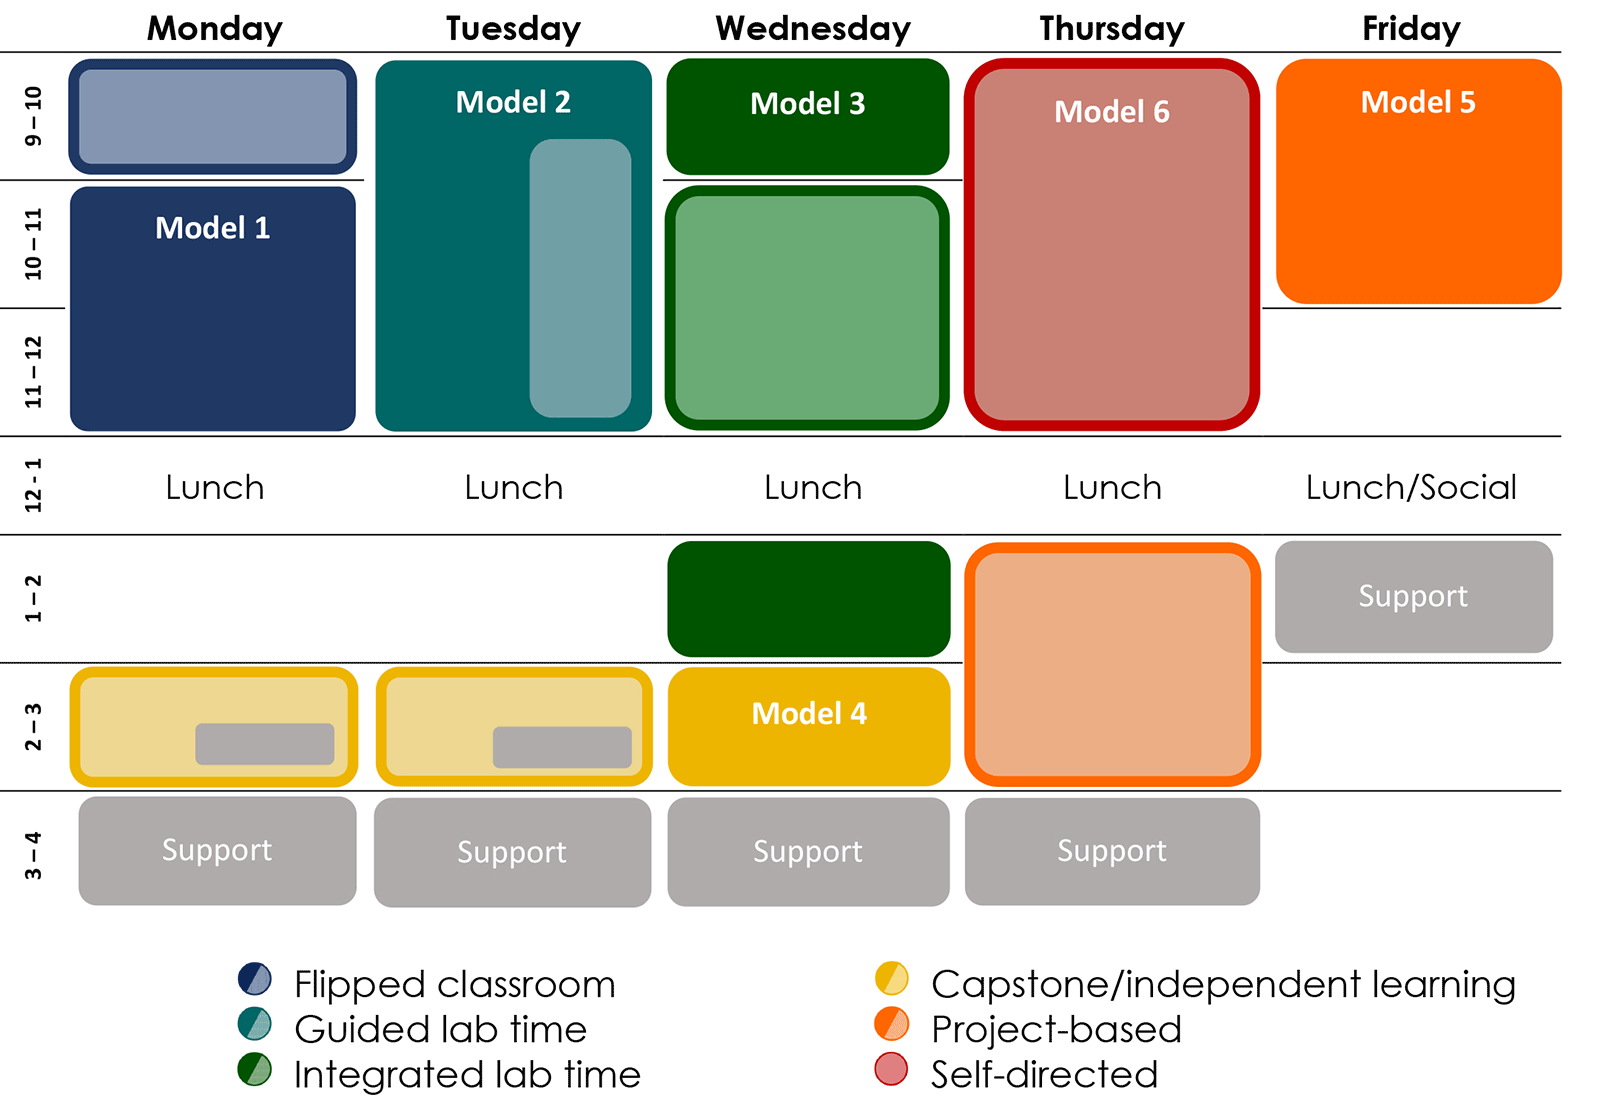 a schdule for the week with items color coded by type of activity.  Purple-Flipped classroom; Blue-Guided lab time; Green-Integrated lab time; Yellow-Capstone/independent learning; Orange-project-based; Red-self-directed.